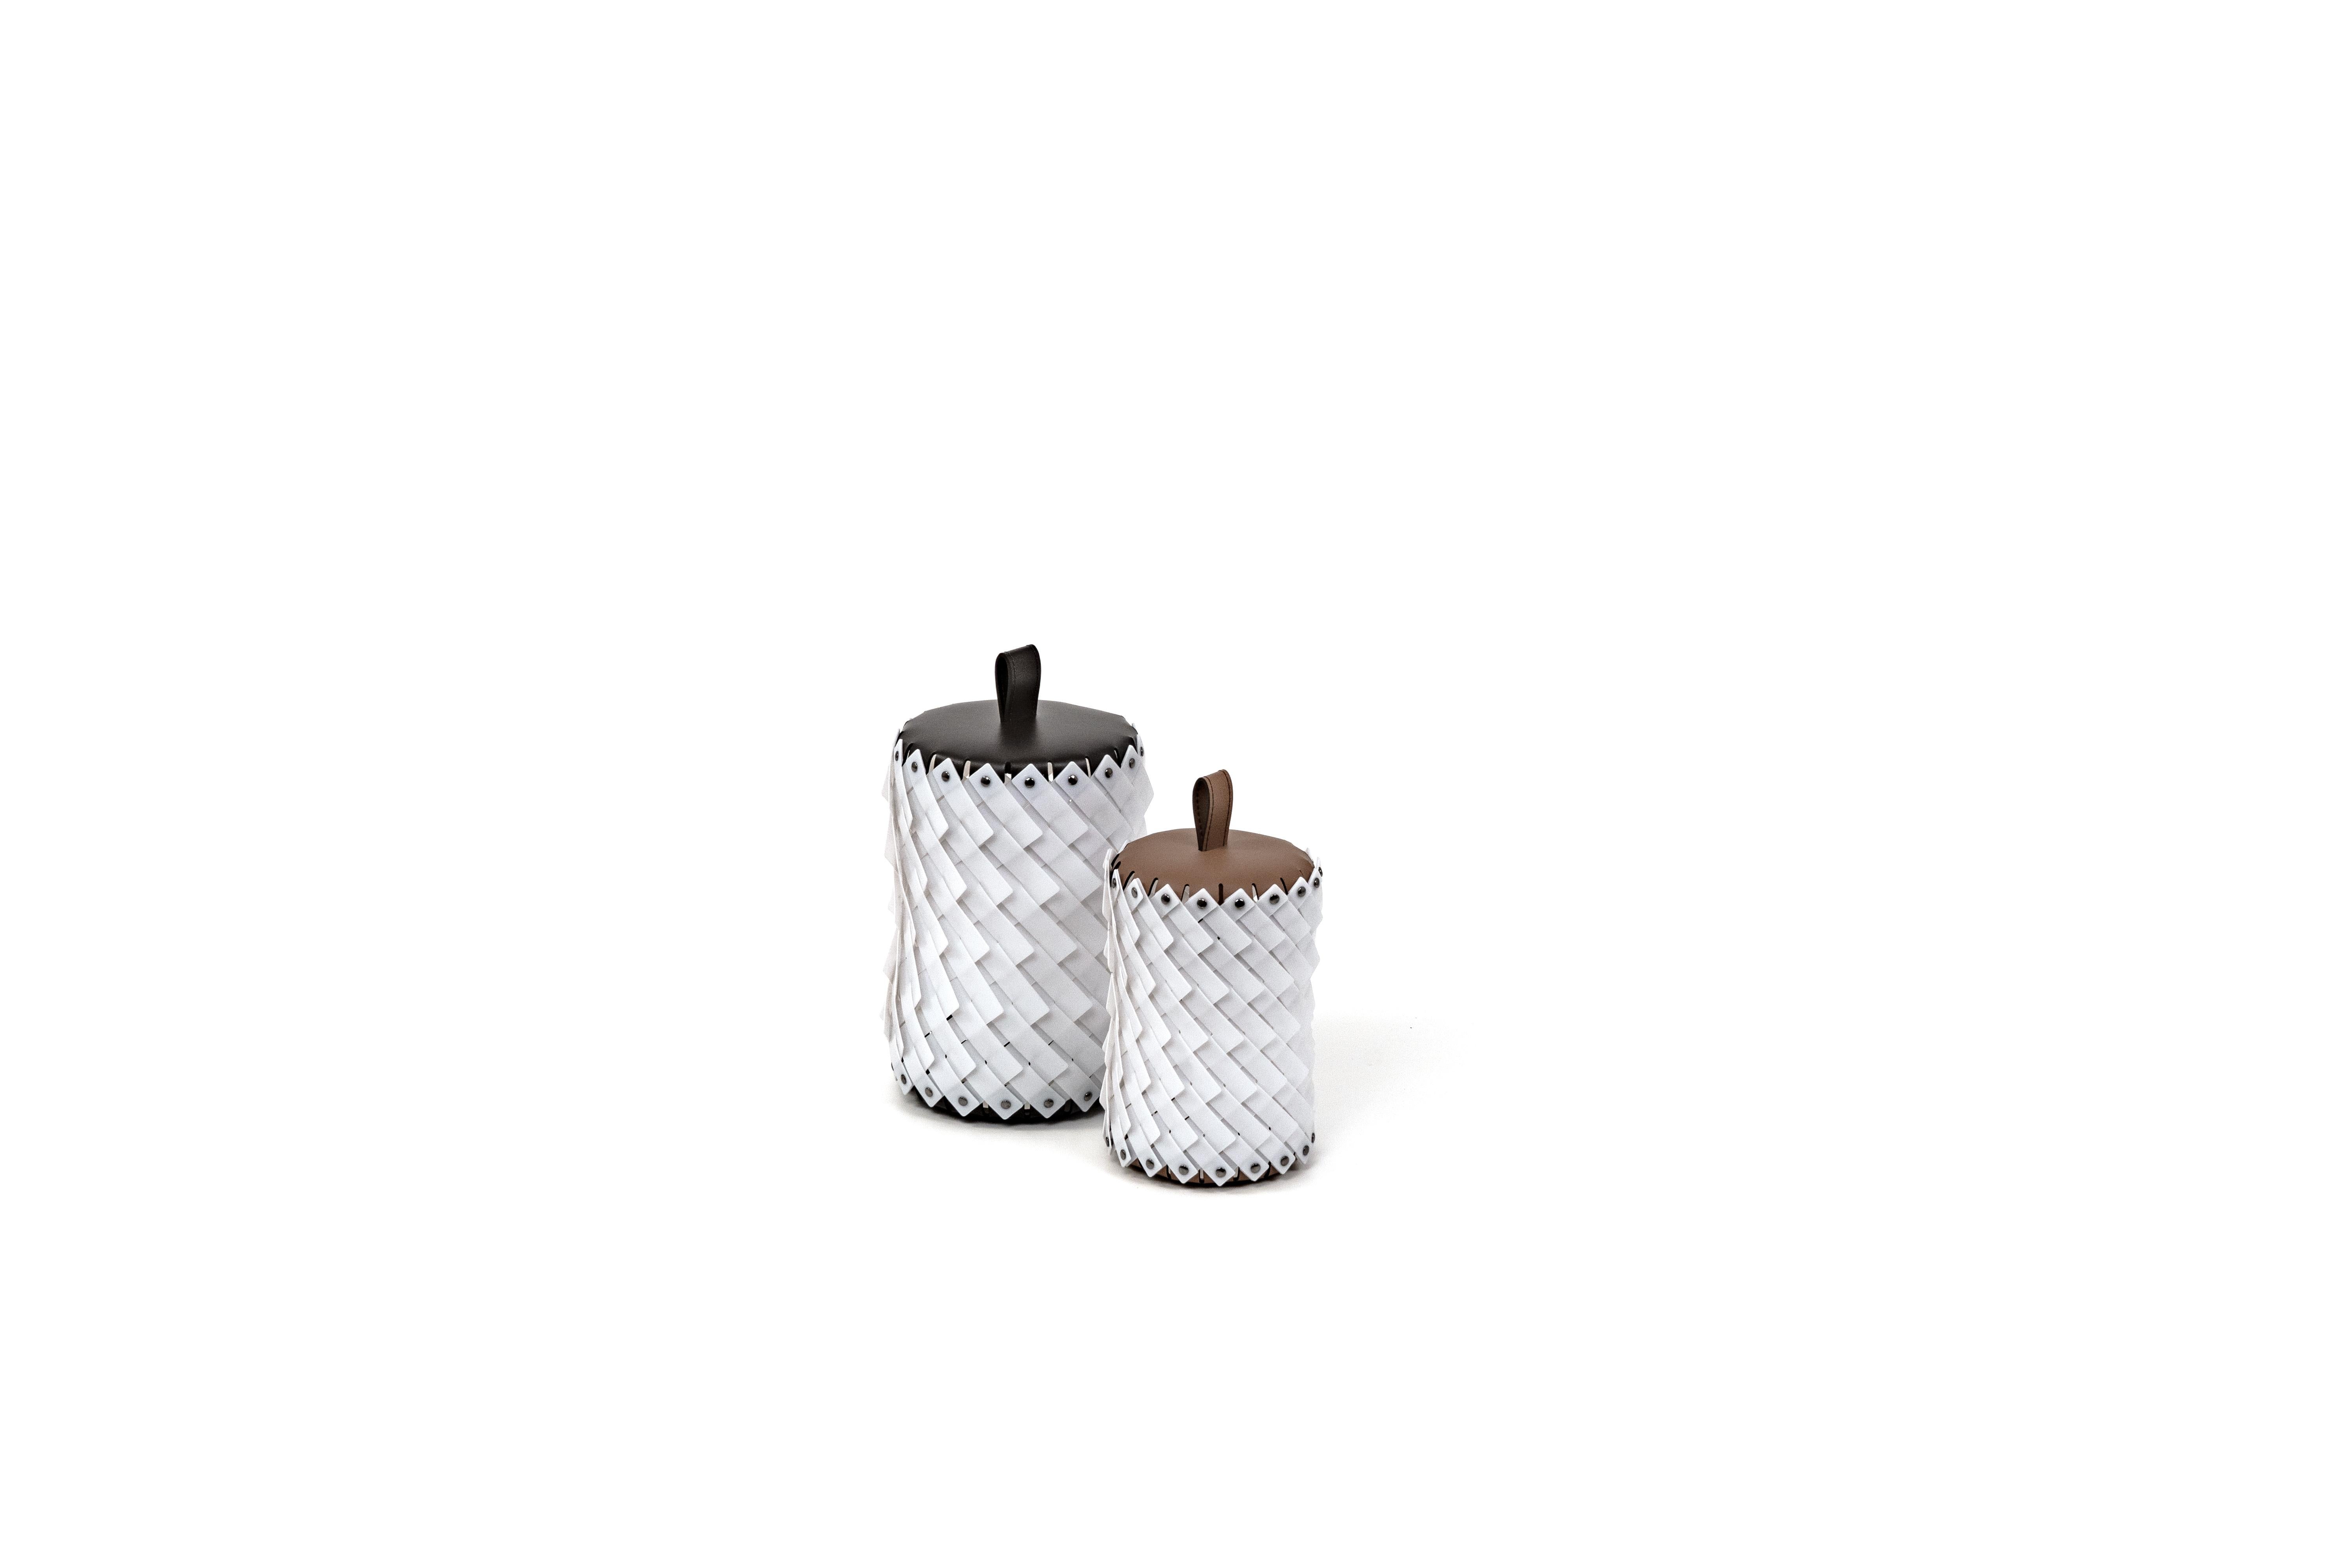 Inspired by our iconic Almeria baskets collection, Pinetti introduces a brand new family of lanterns.

Wireless and USB rechargeable these lamps are made with hand-woven plastic modulus, with the base and top are made with our recycled leather.